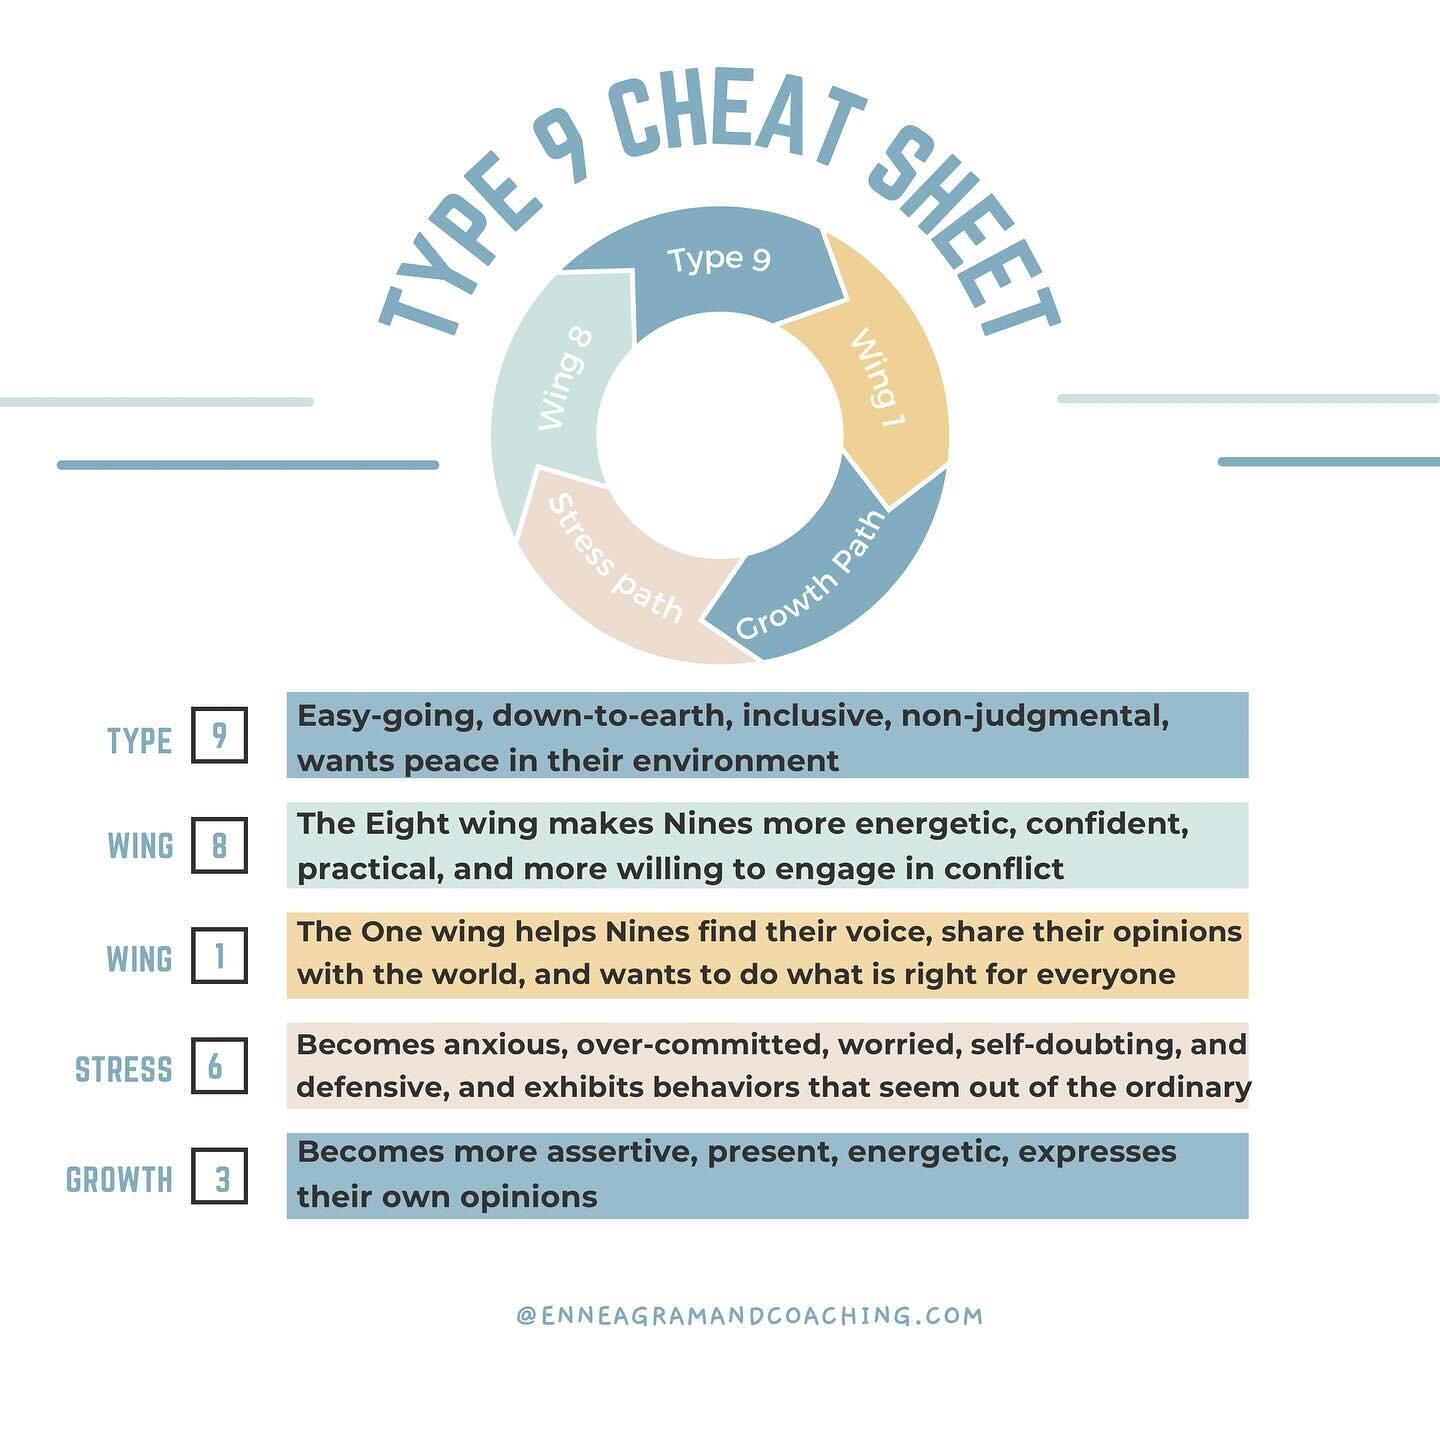 Enneagram Cheat Sheet &ldquo;All 9 Types&rdquo; Do you know your type? Did you know you were connected to 4 other types? ⤵️ 
.
.
.

#enneagraminstitute #enneagramjourney #enneagramtype #enneagramlife #enneagrammemes #enneagramtypes #enneagramtalk #en